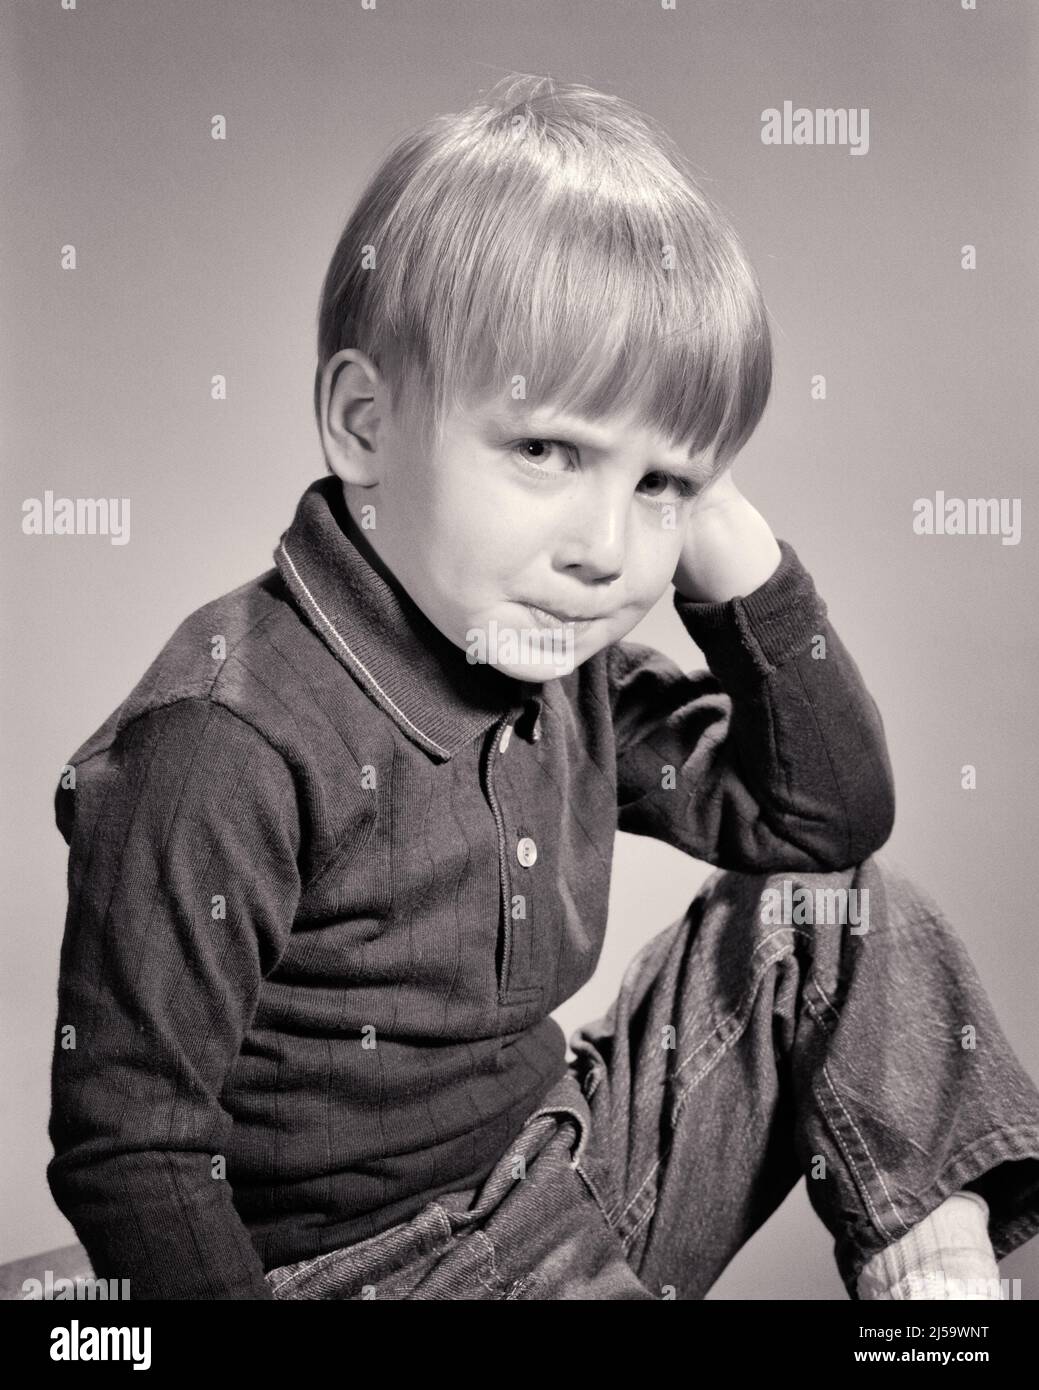 1960s CUTE LITTLE BLONDE BOY WITH POUTING PERTURBED ANGRY FACIAL EXPRESSION LOOKING AT CAMERA - j12332 HAR001 HARS LIFESTYLE ANNOYED WINNING STUDIO SHOT HOME LIFE COPY SPACE HALF-LENGTH MALES DENIM GESTURING EXPRESSIONS B&W SADNESS EYE CONTACT HUMOROUS DISTRESSED POUTING IRATE LEADERSHIP COMICAL PRIDE GESTURES CONCEPTUAL COMEDY POUT DISPLEASURE HOSTILITY PERTURBED PLEASANT AGREEABLE ANNOYANCE BLUE JEANS CHARMING EMOTION EMOTIONAL GROWTH INFORMAL IRRITATED JUVENILES LOVABLE PLEASING TWILL ADORABLE APPEALING BLACK AND WHITE CASUAL CAUCASIAN ETHNICITY DISPLEASED HAR001 OLD FASHIONED Stock Photo